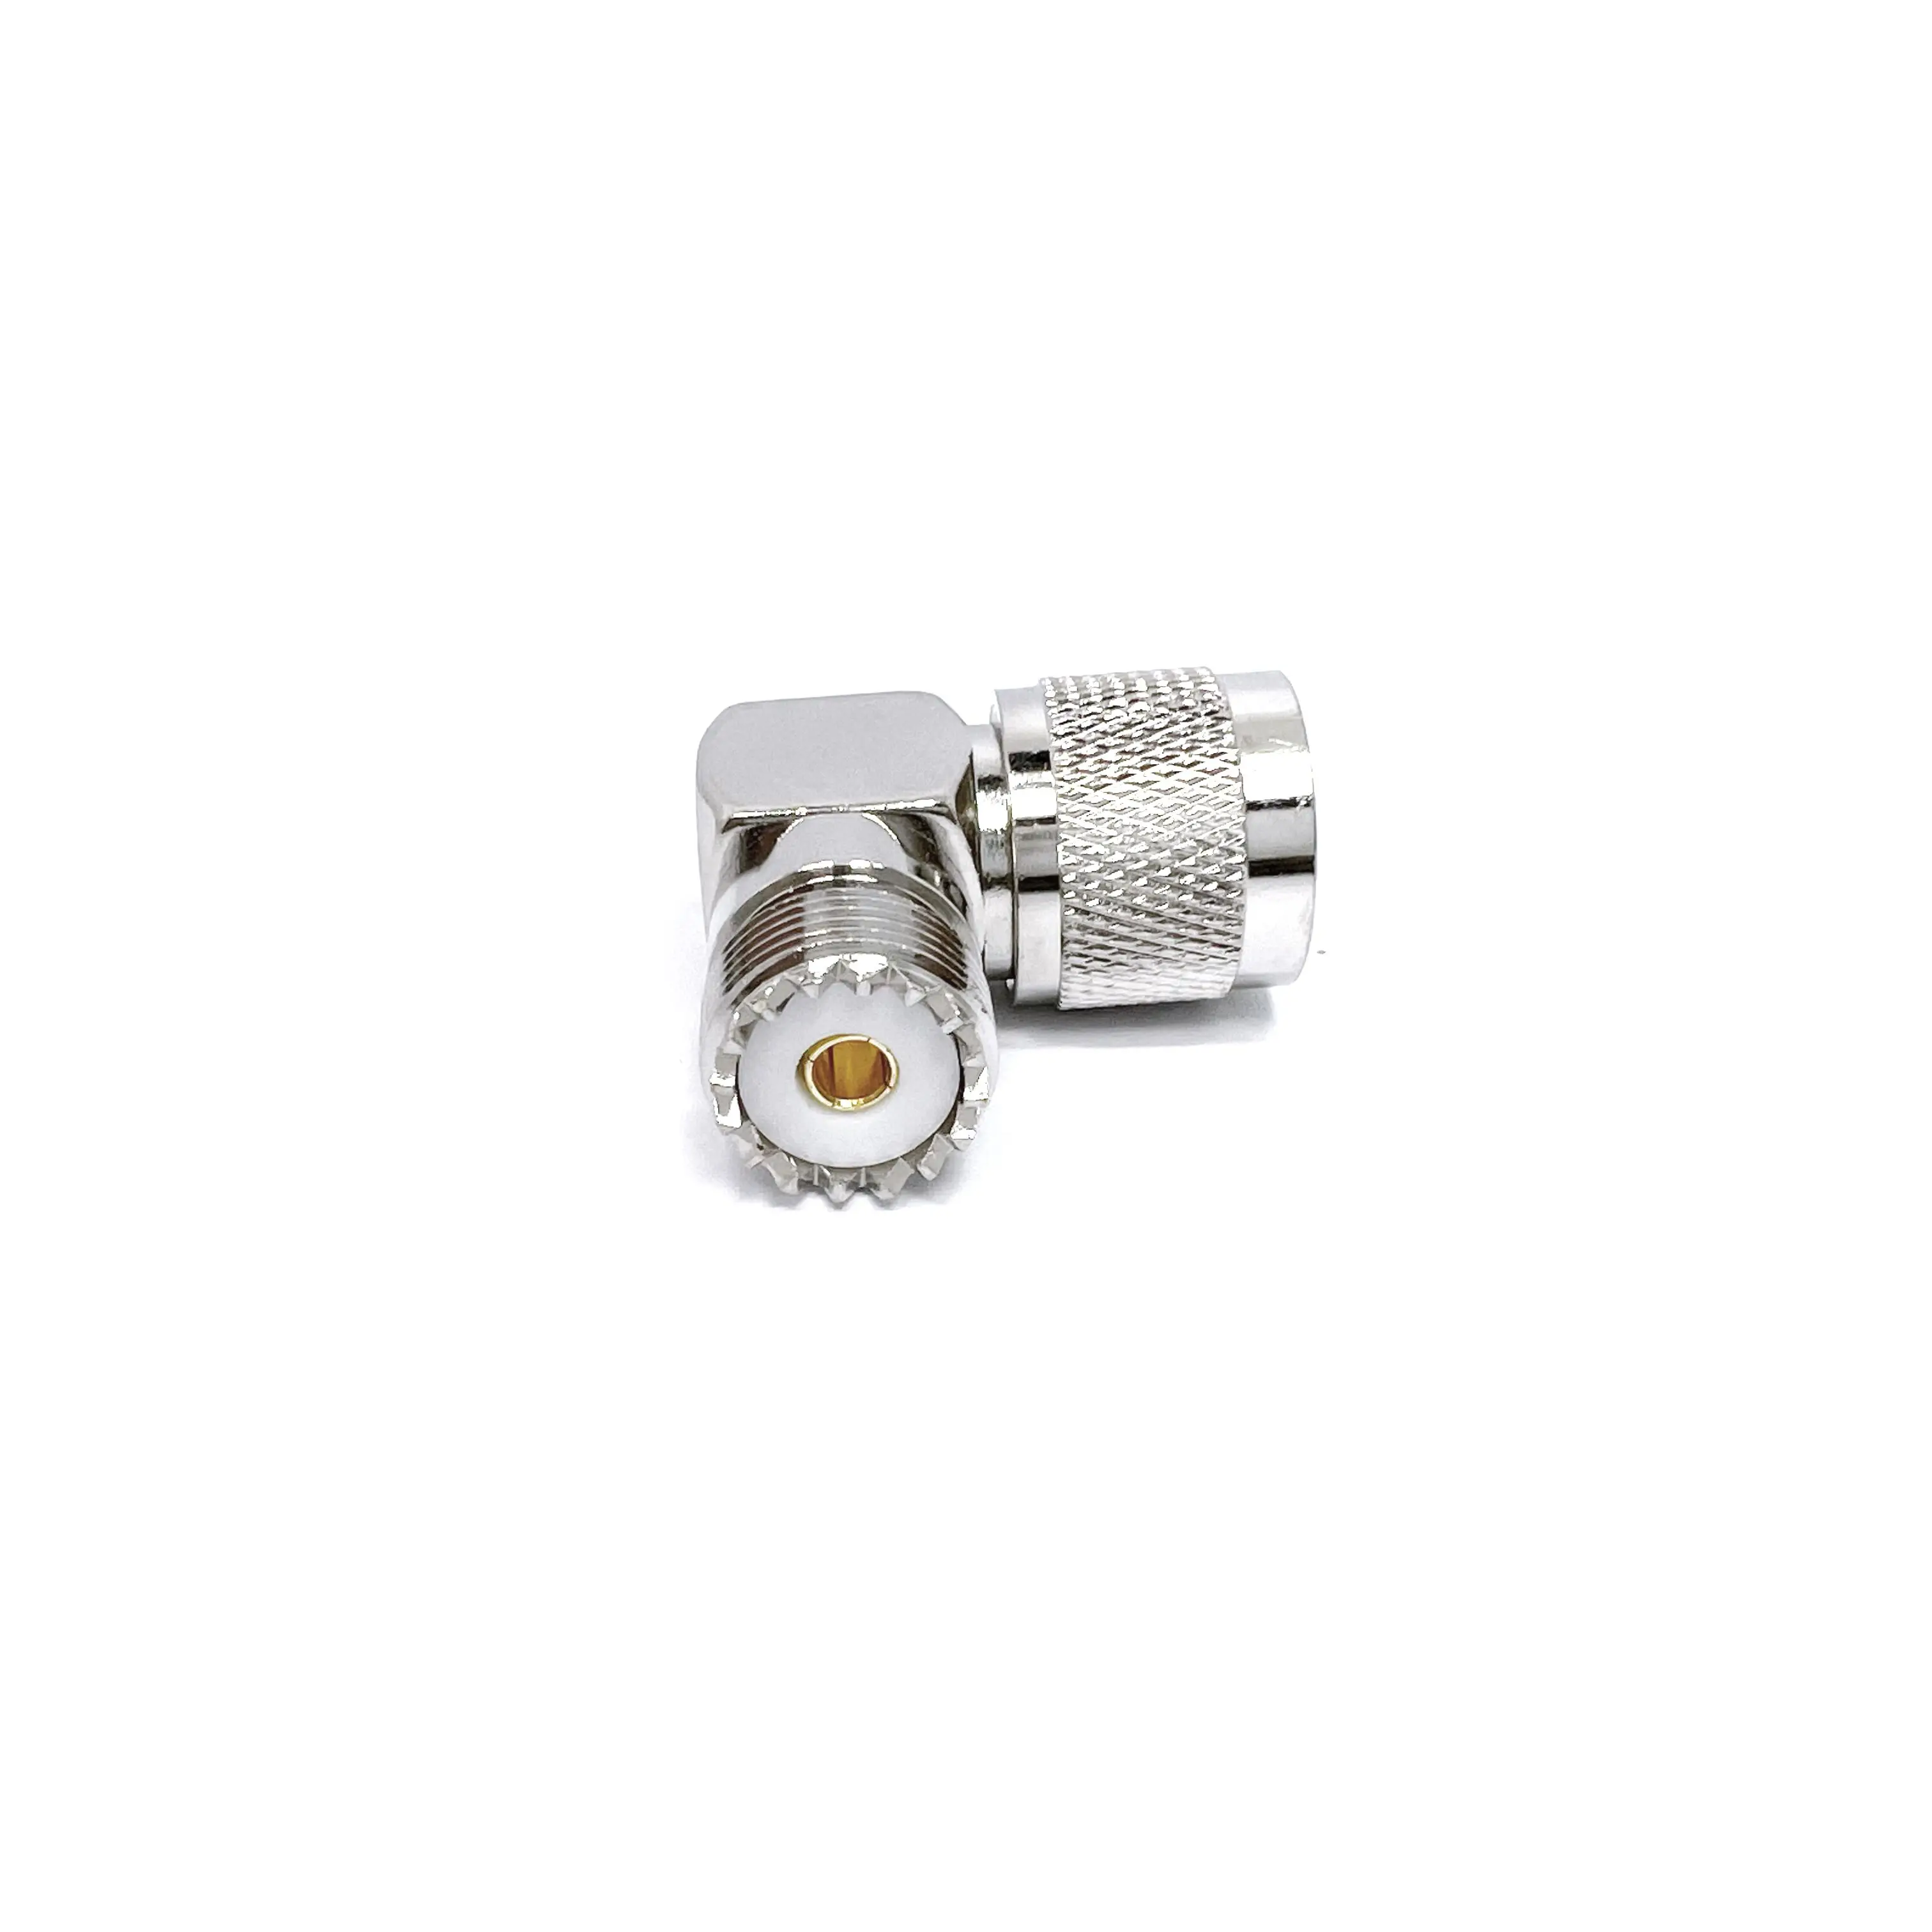 Brass Material Rf Connector UHF Female Jack To UHF PL259 Male Plug Right Angle 90 degree L Shape Adapter factory